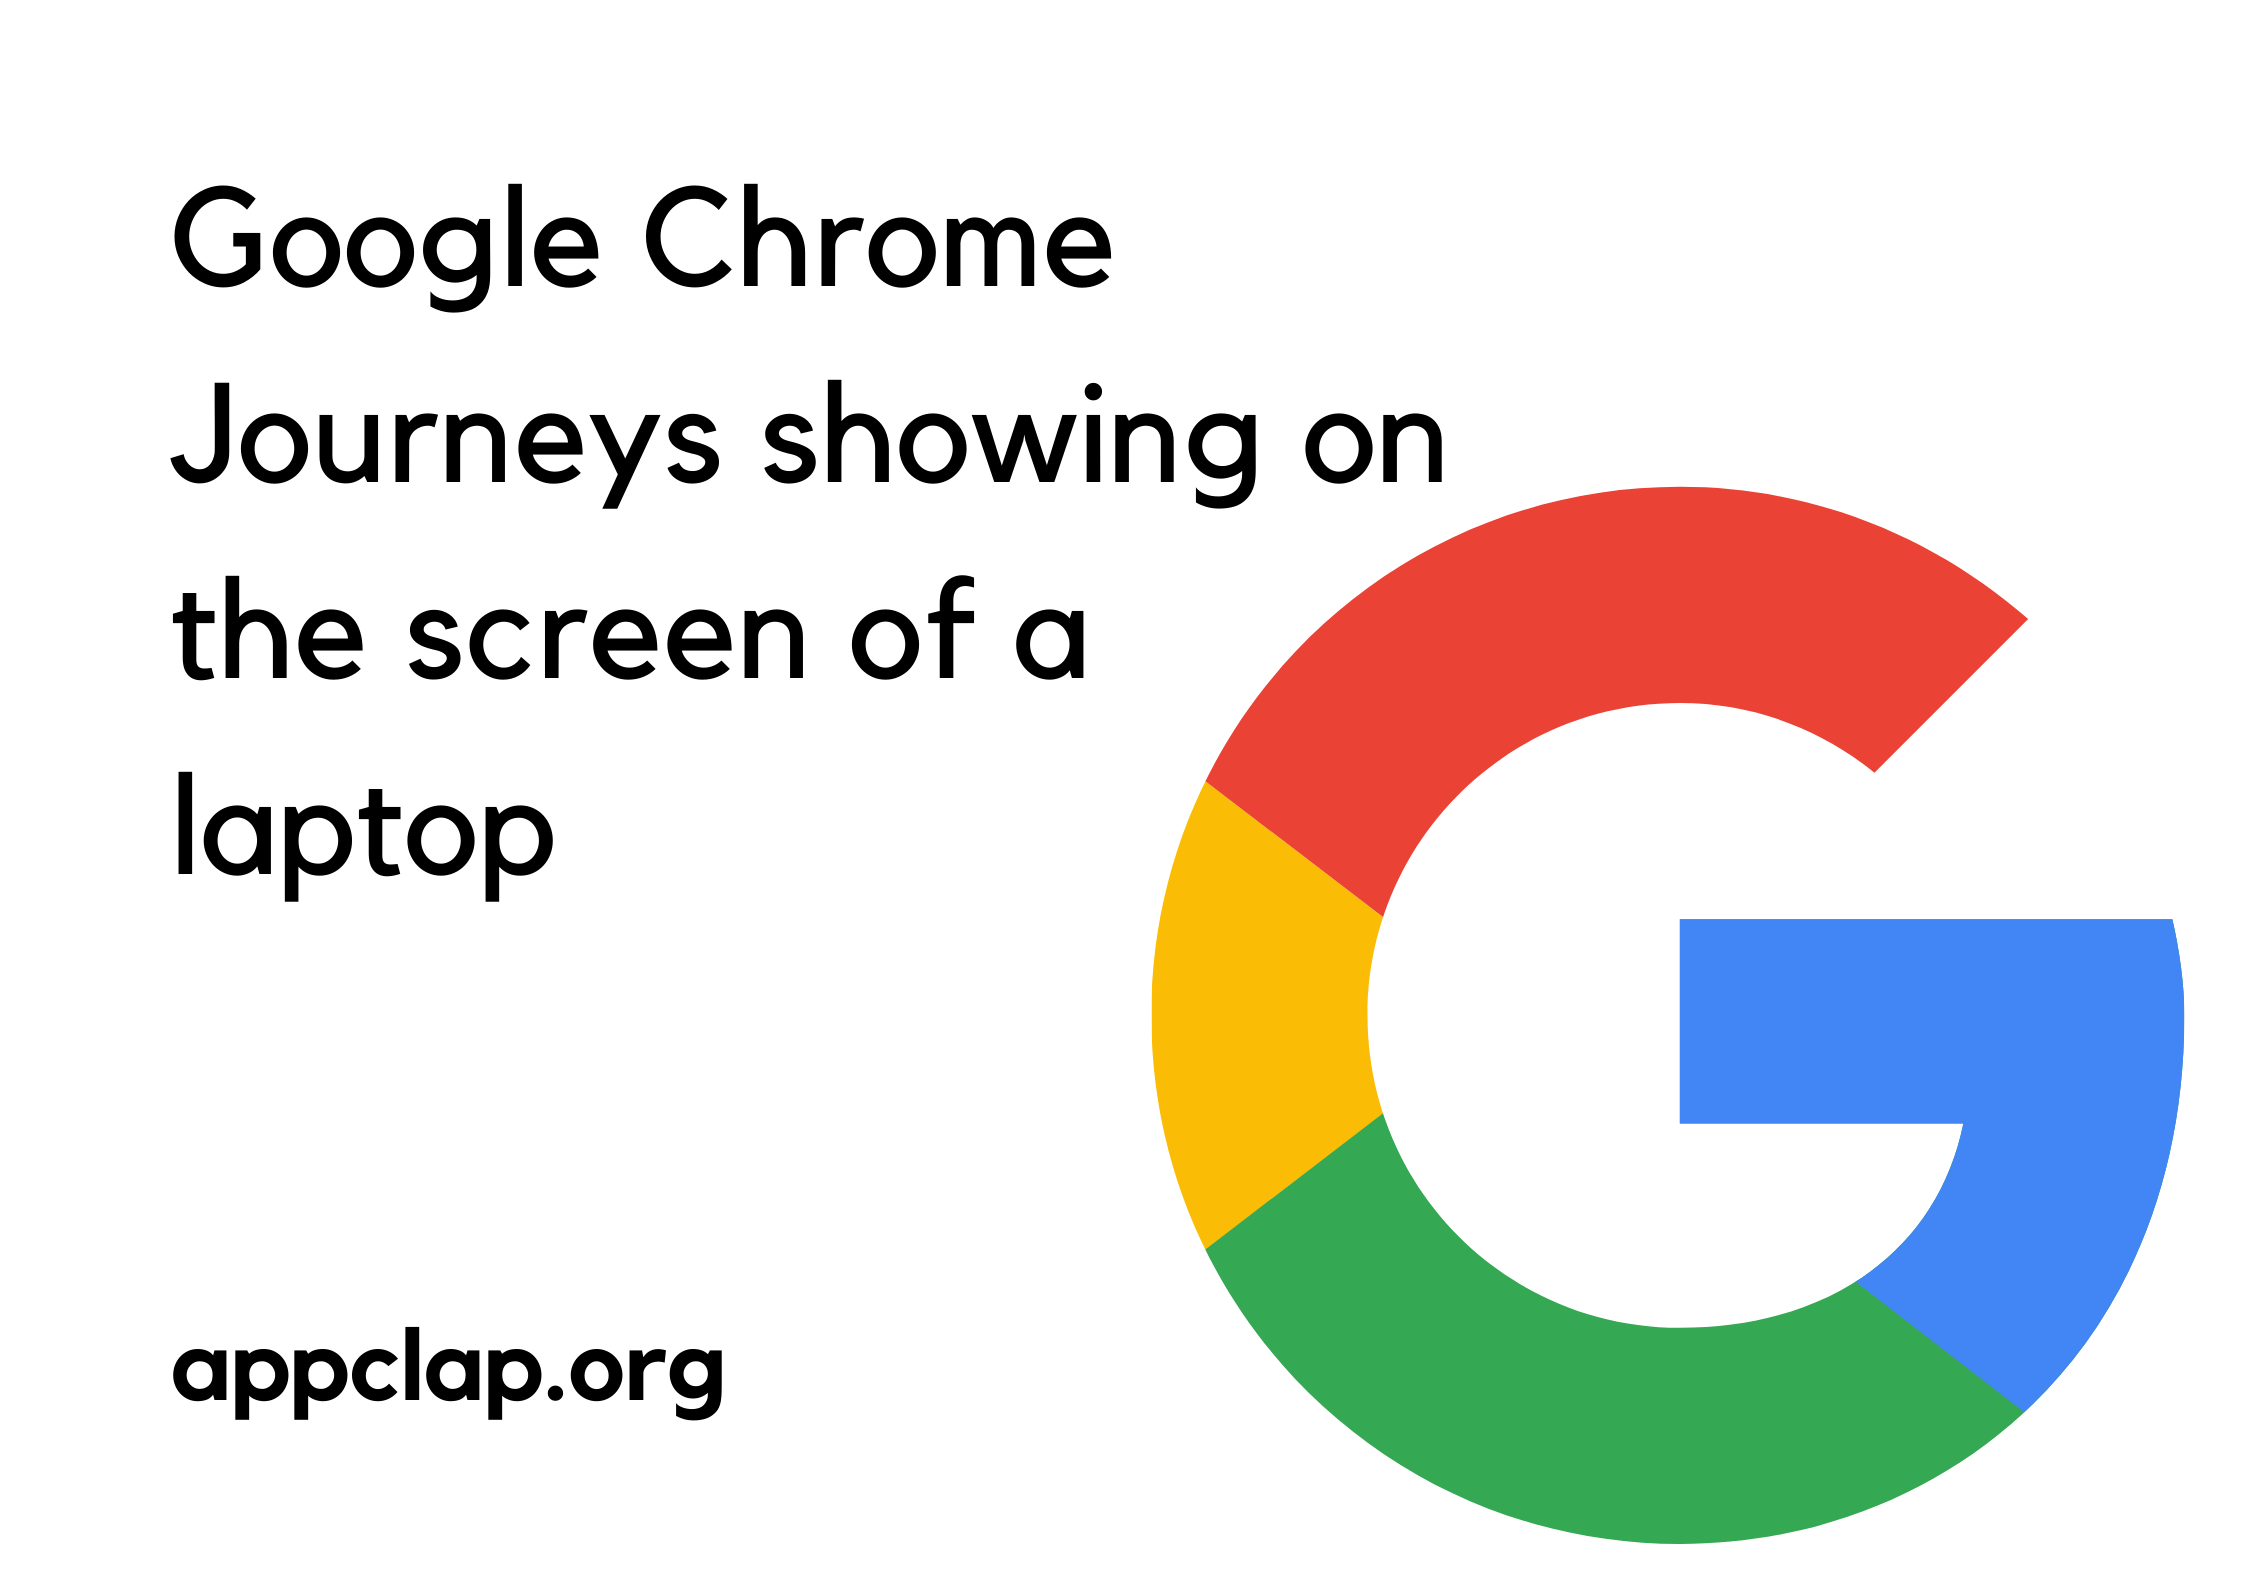 Google Chrome Journeys showing on the screen of a laptop